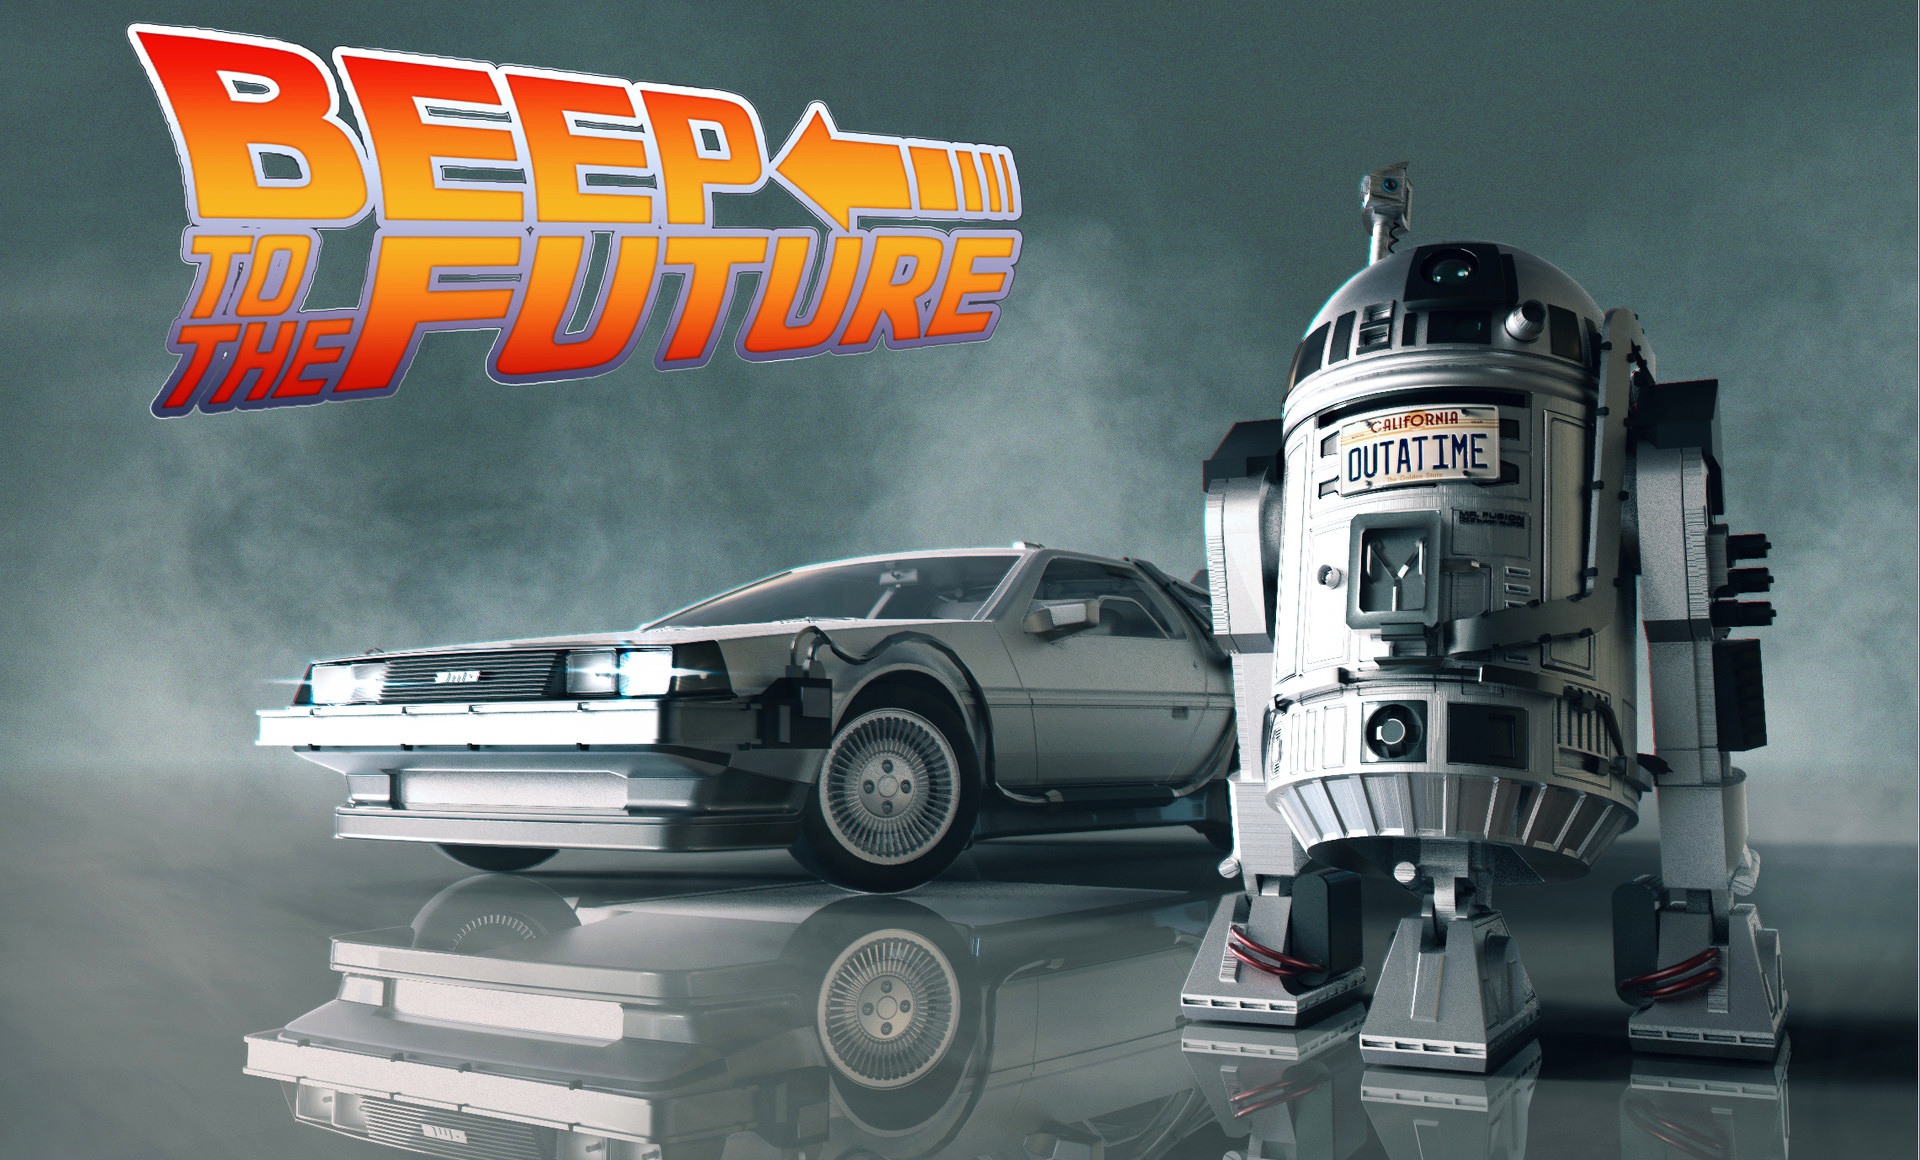 General 1920x1160 Star Wars Back to the Future R2-D2 Star Wars Droids Time Machine science fiction humor reflection car vehicle crossover silver cars Star Wars Humor movies